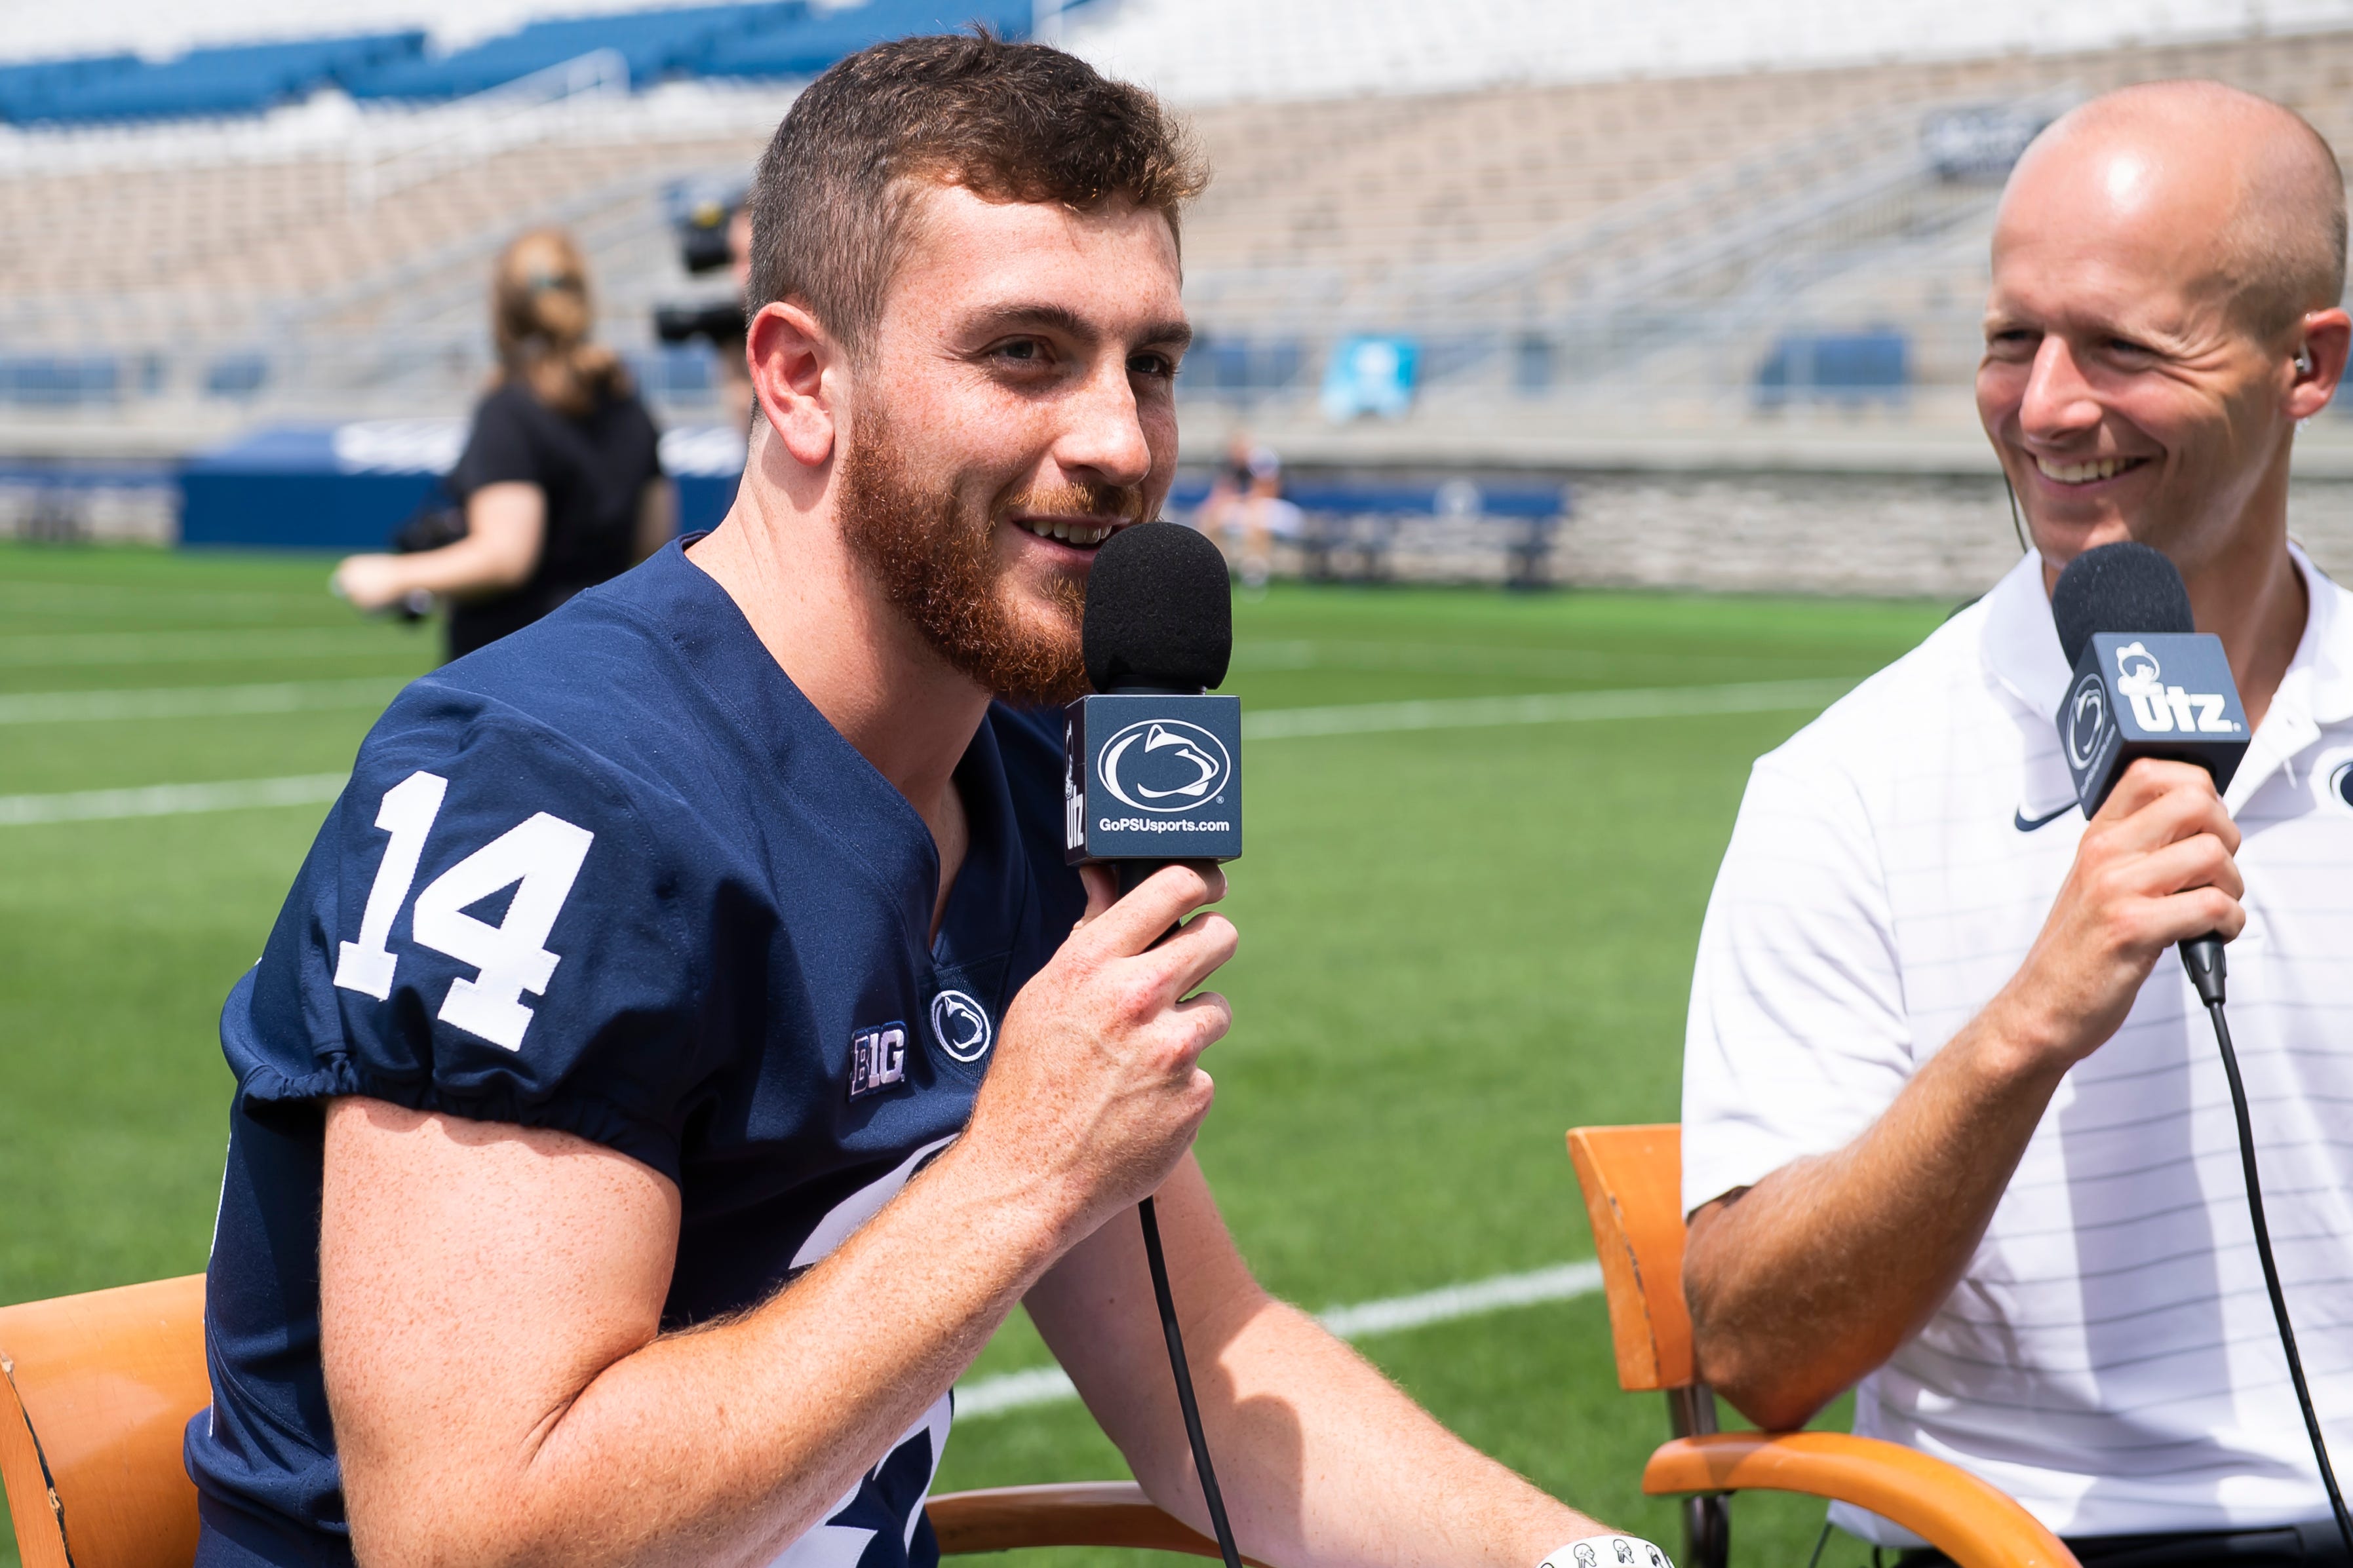 Sixth-year senior quarterback Sean Clifford smiles as he talks about one of his teammates standing in front of him during an interview at Penn State football media day in Beaver Stadium on Saturday, August 6, 2022